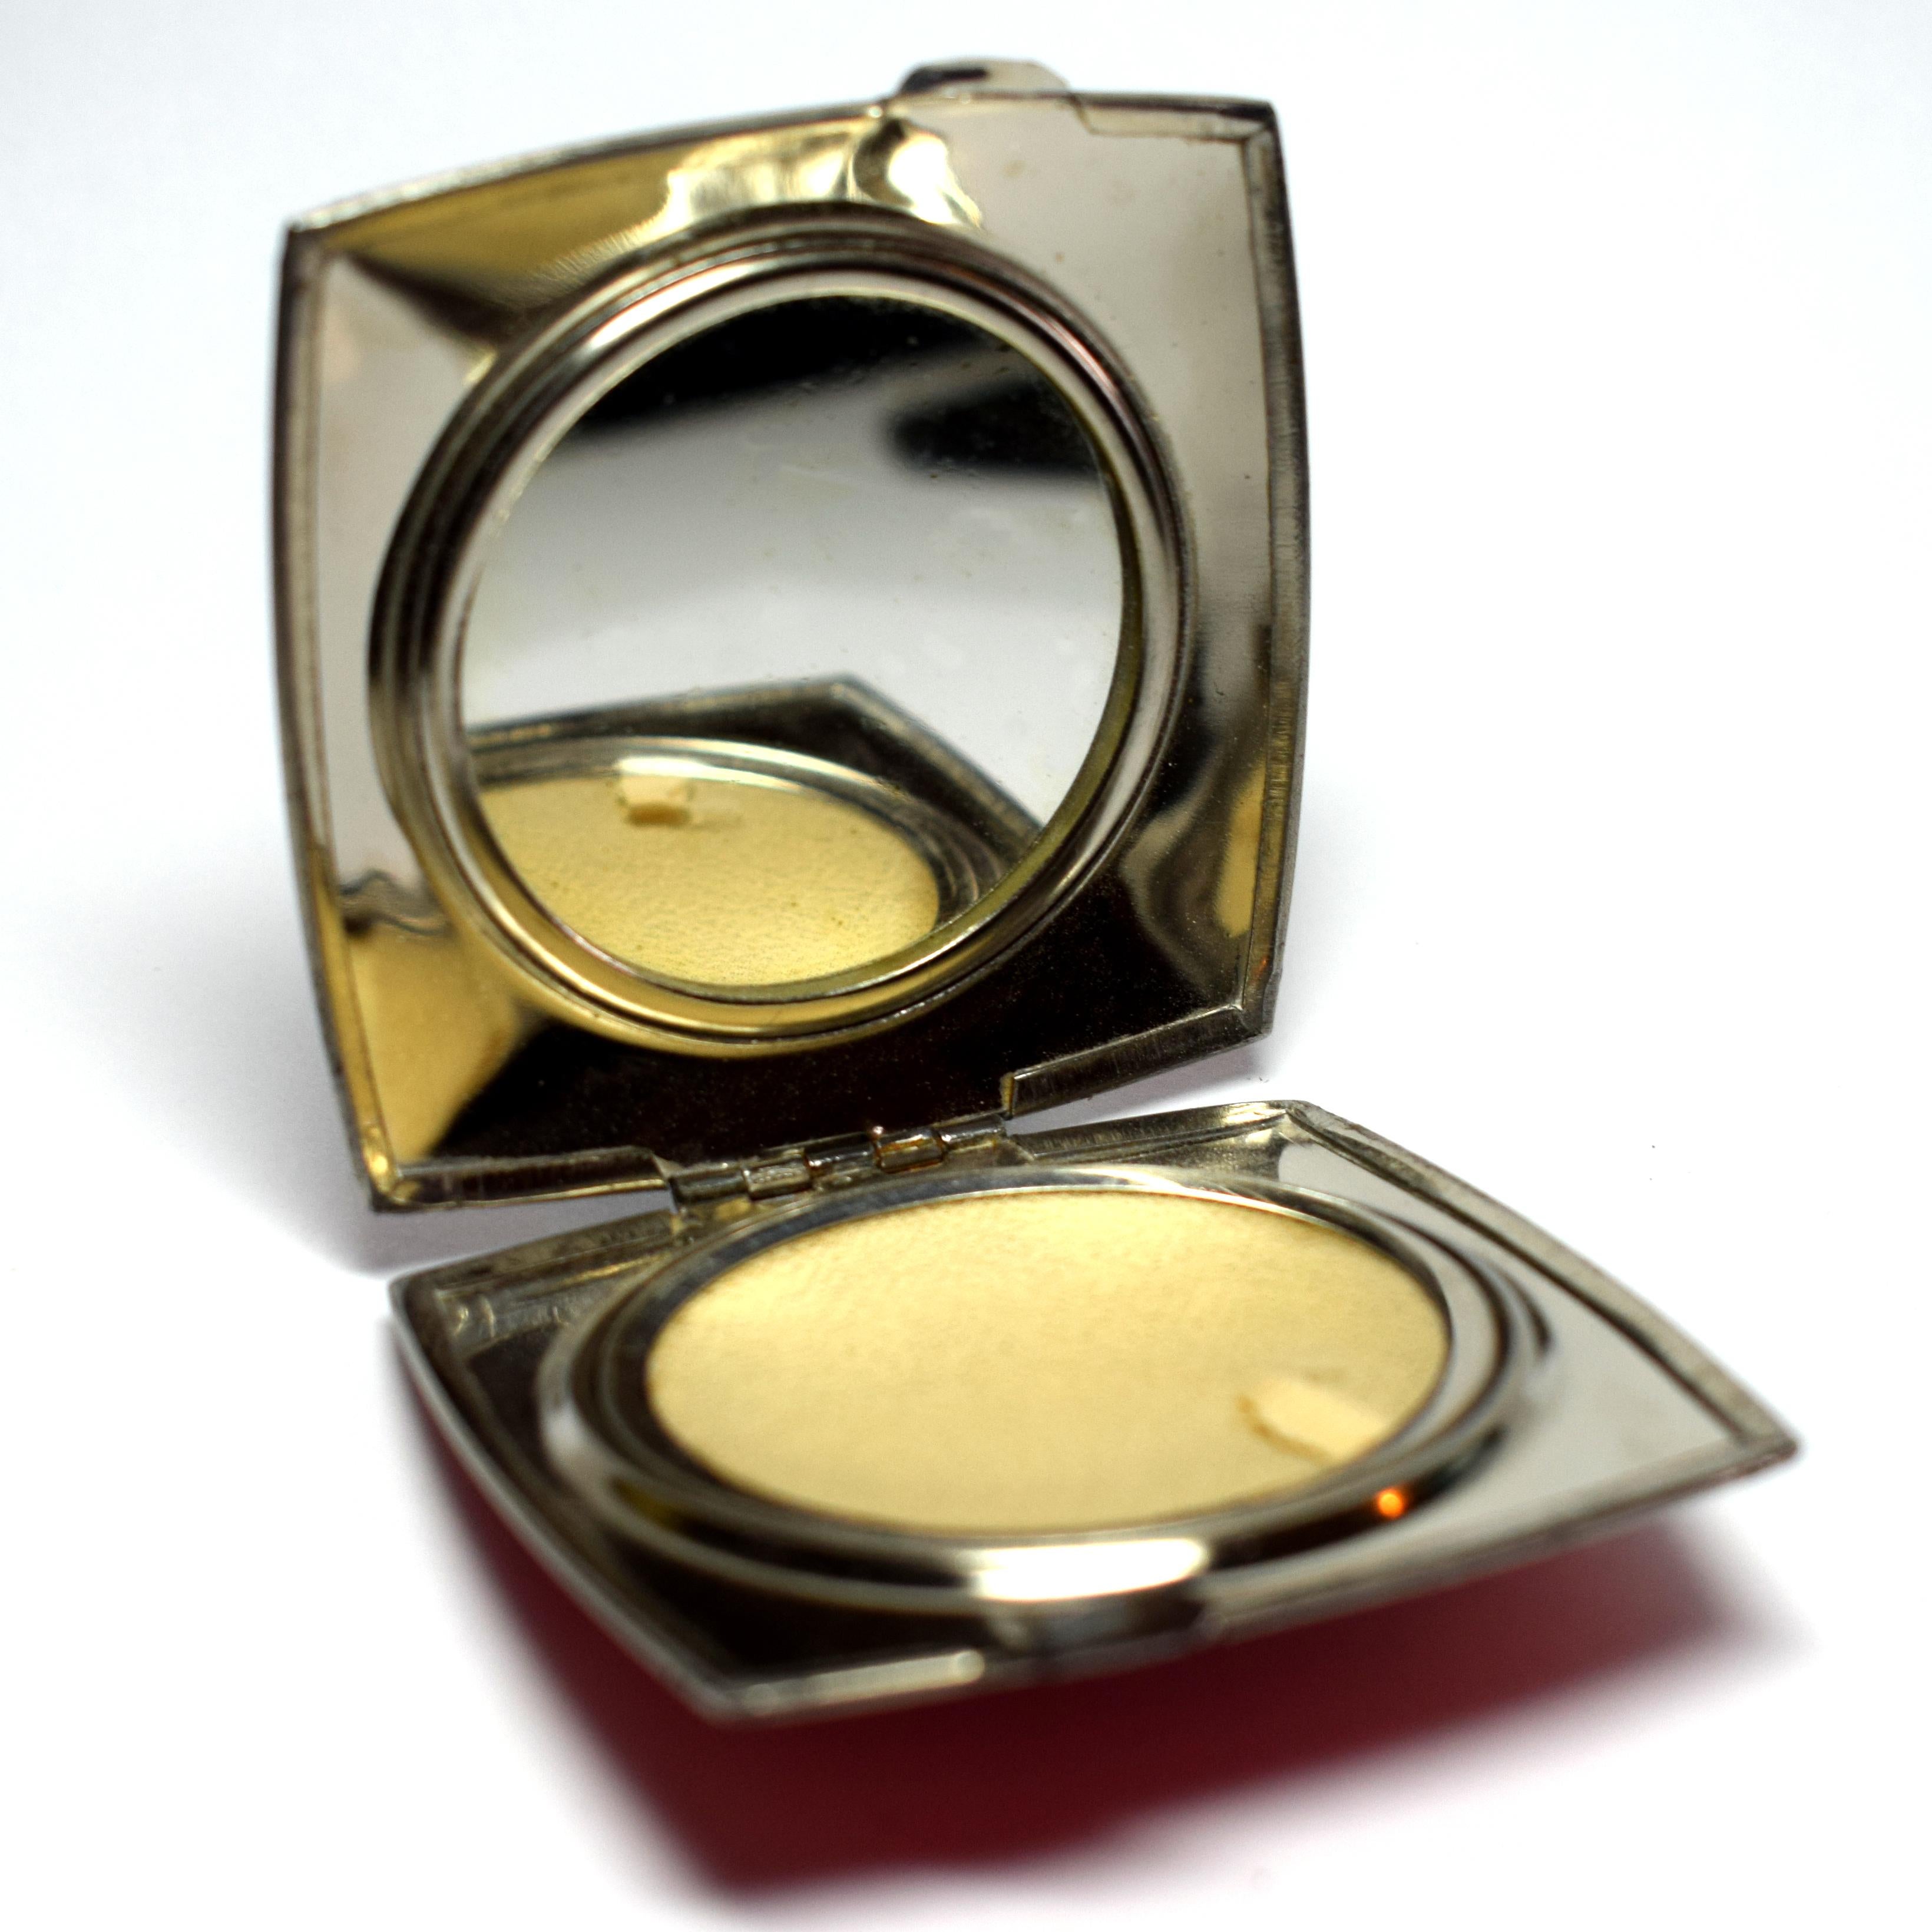 Very distinctive and stylish 1930s Art Deco enamel decorated ladies powder compact. The interior includes a mirror and a removal mesh lid which covers the powder. This wonderful compact is in great condition with minimal signs of age.